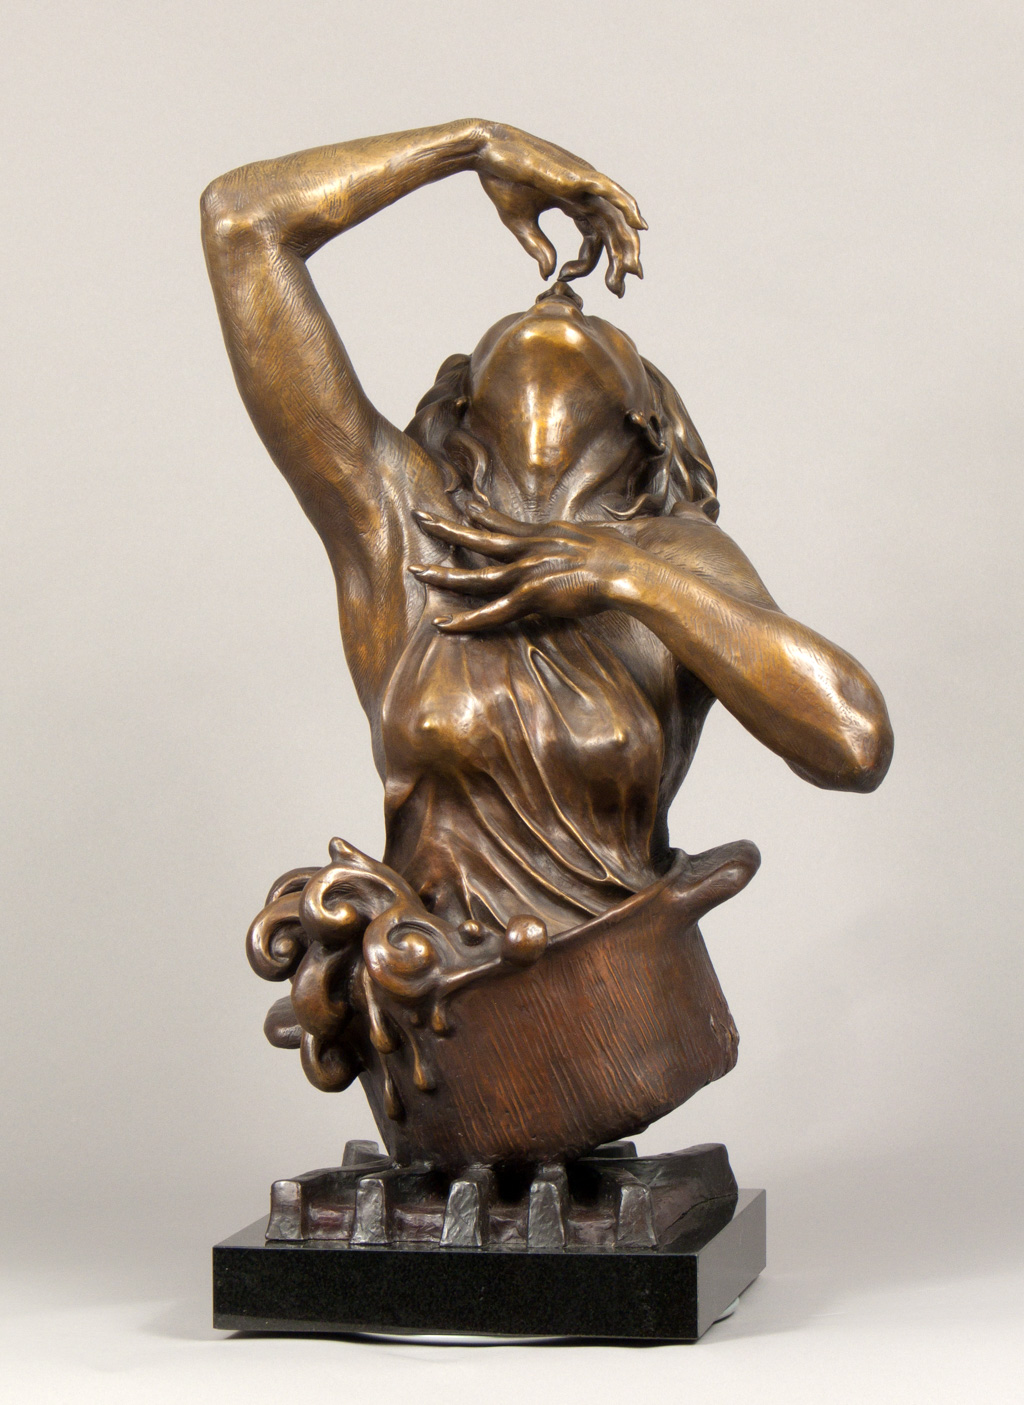 A bronze sculpture of a woman coming out of a pot